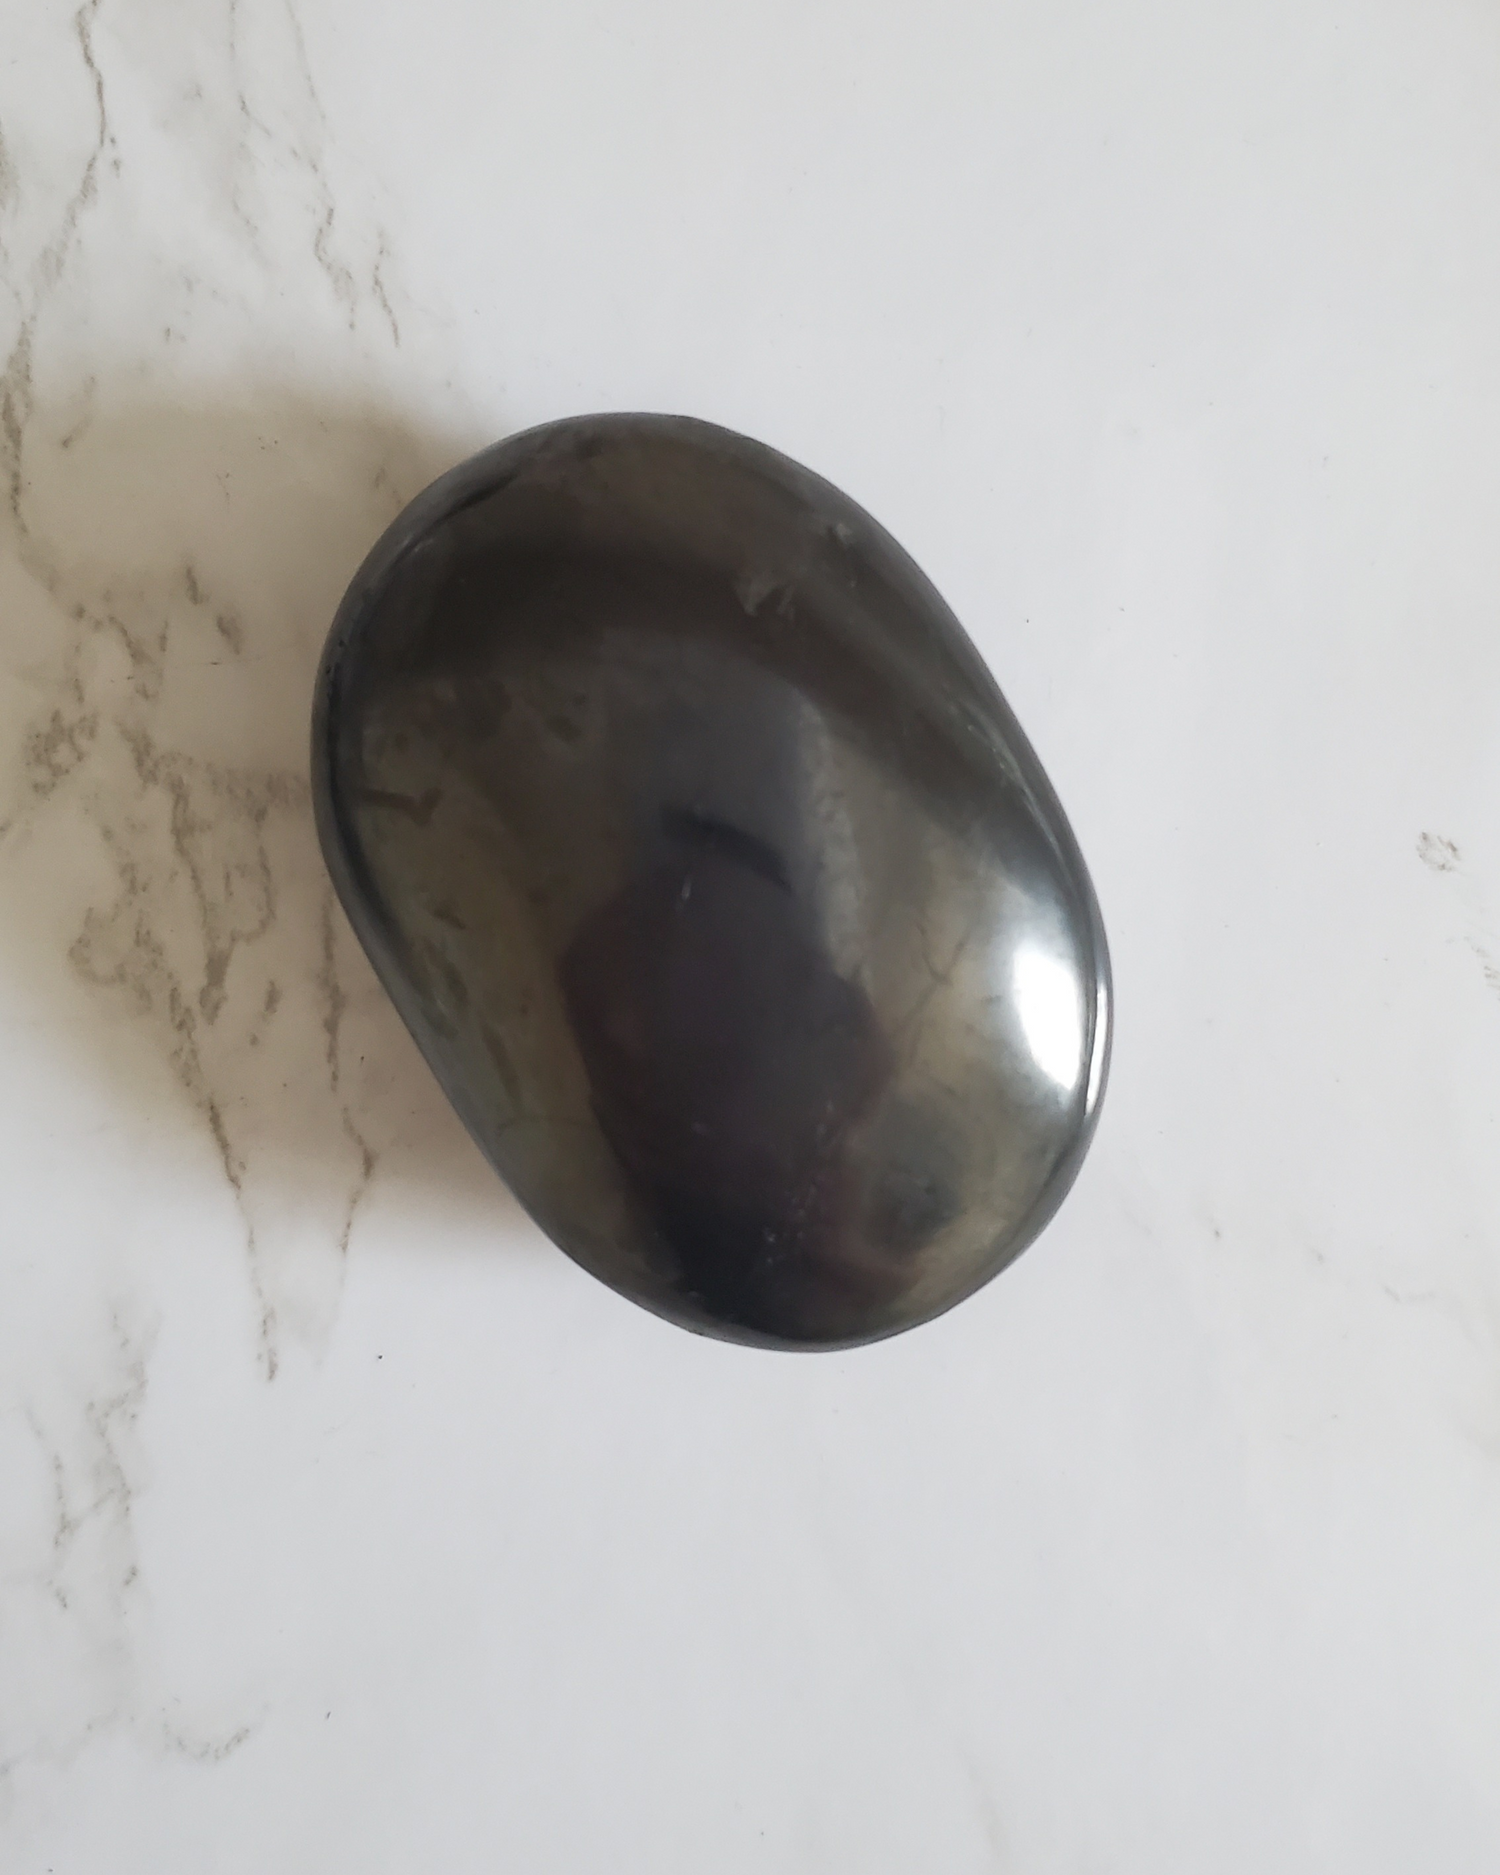 Natural Pain Relief and Protection from 5G and EMFs Shungite Palmstone